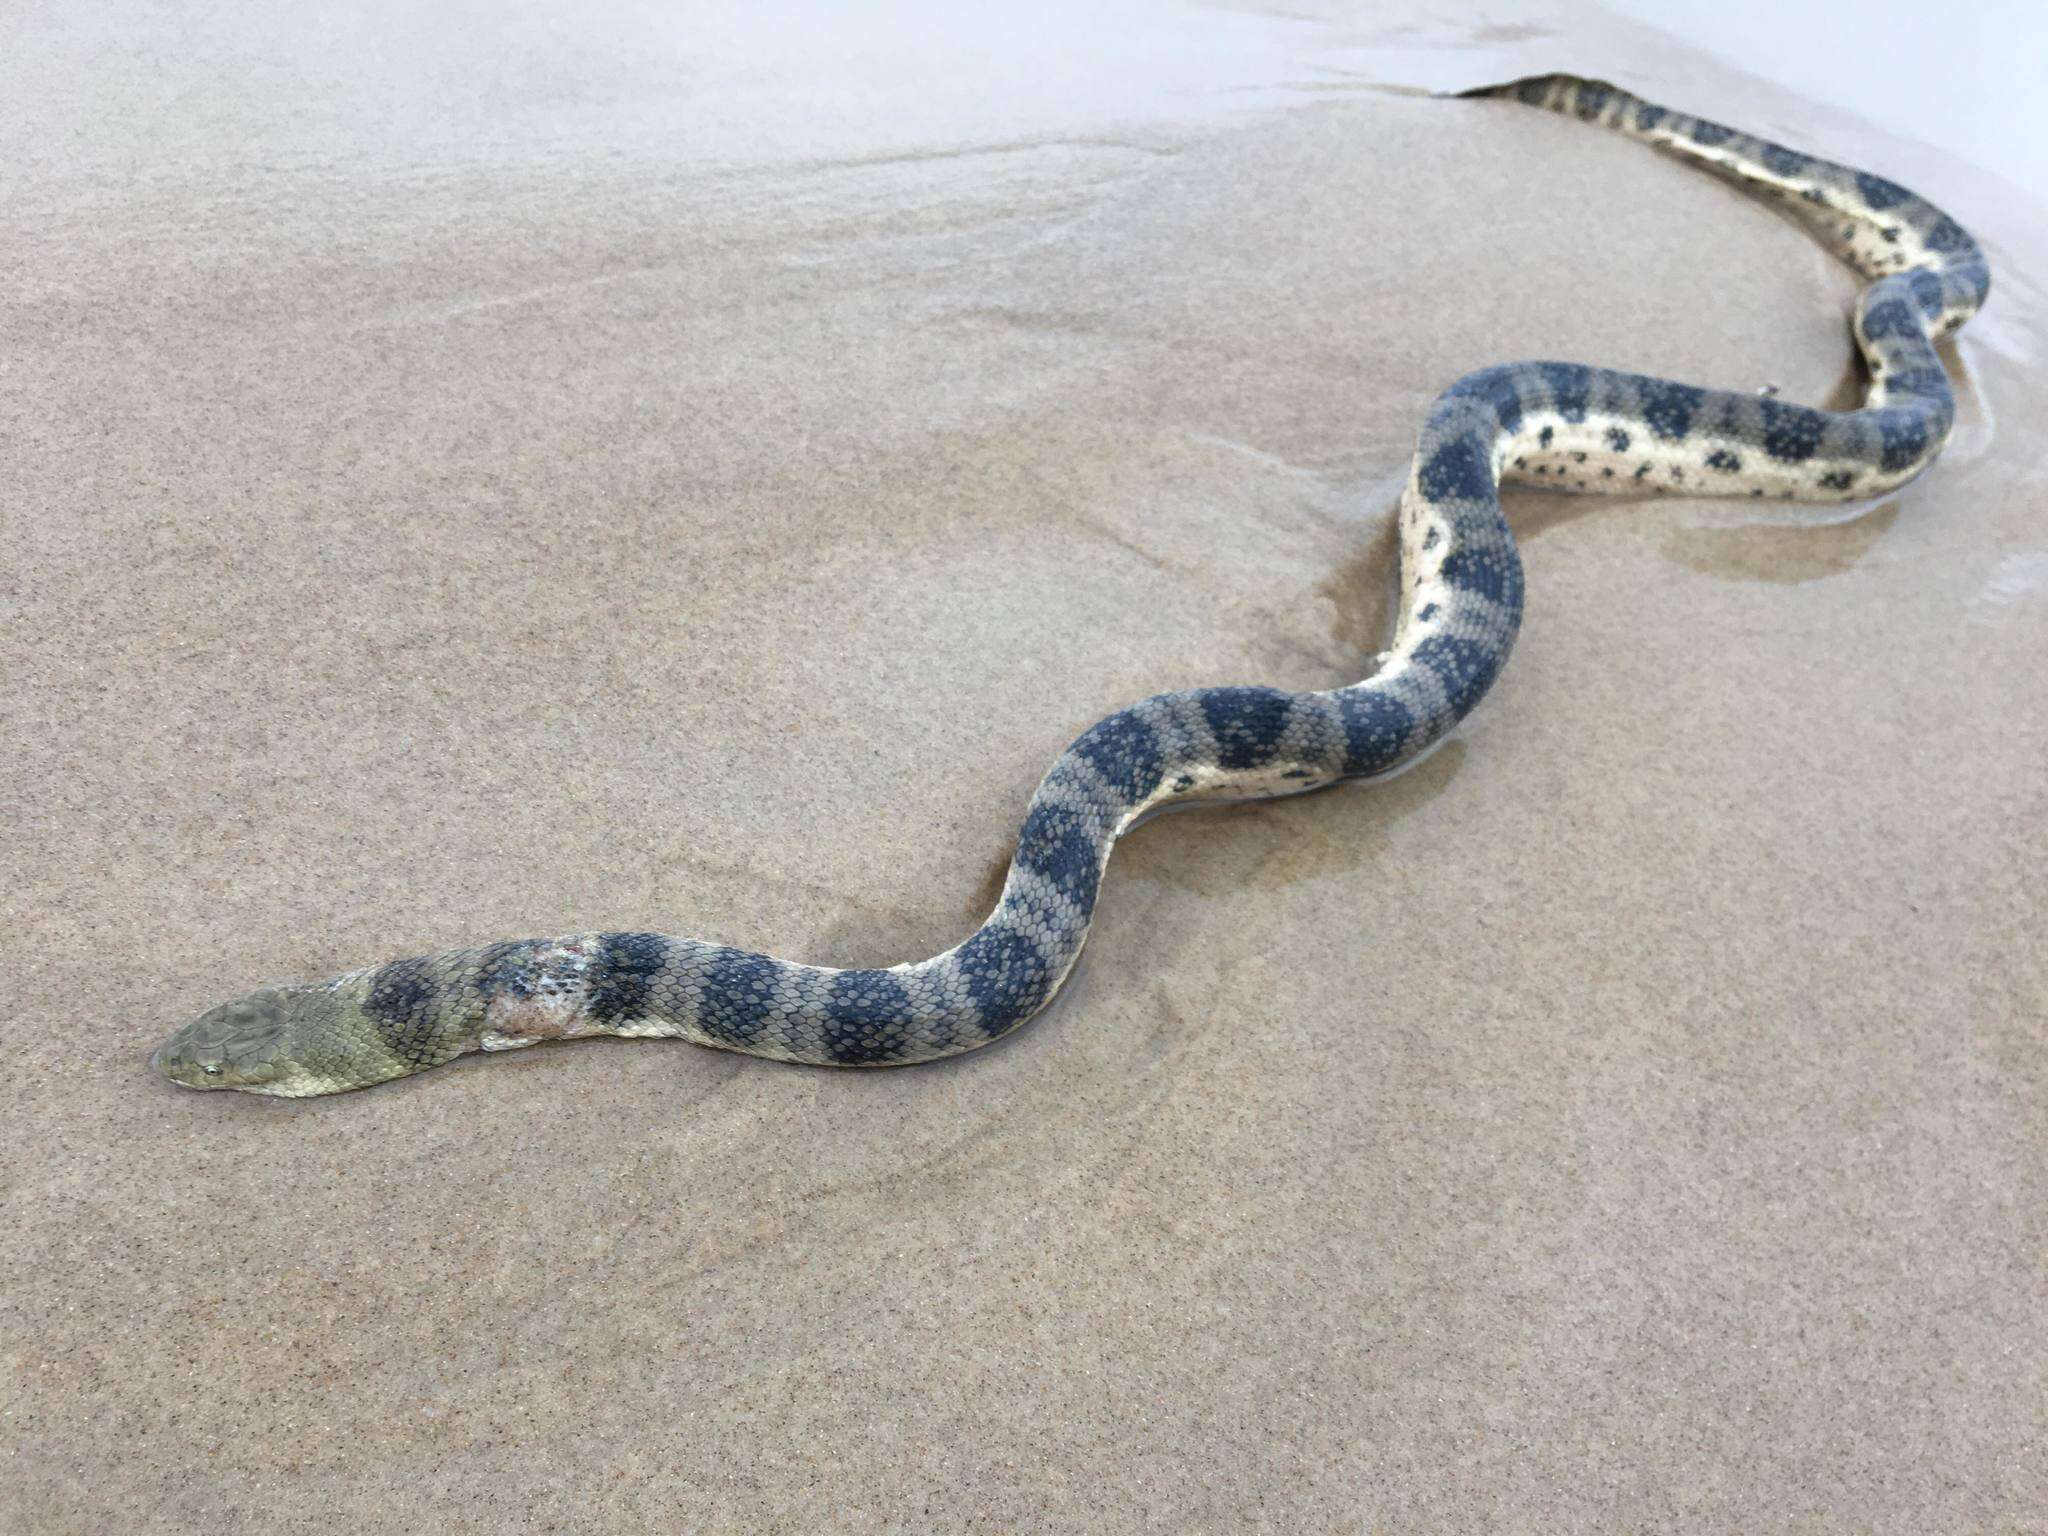 Image of Olive-headed or greater seasnake